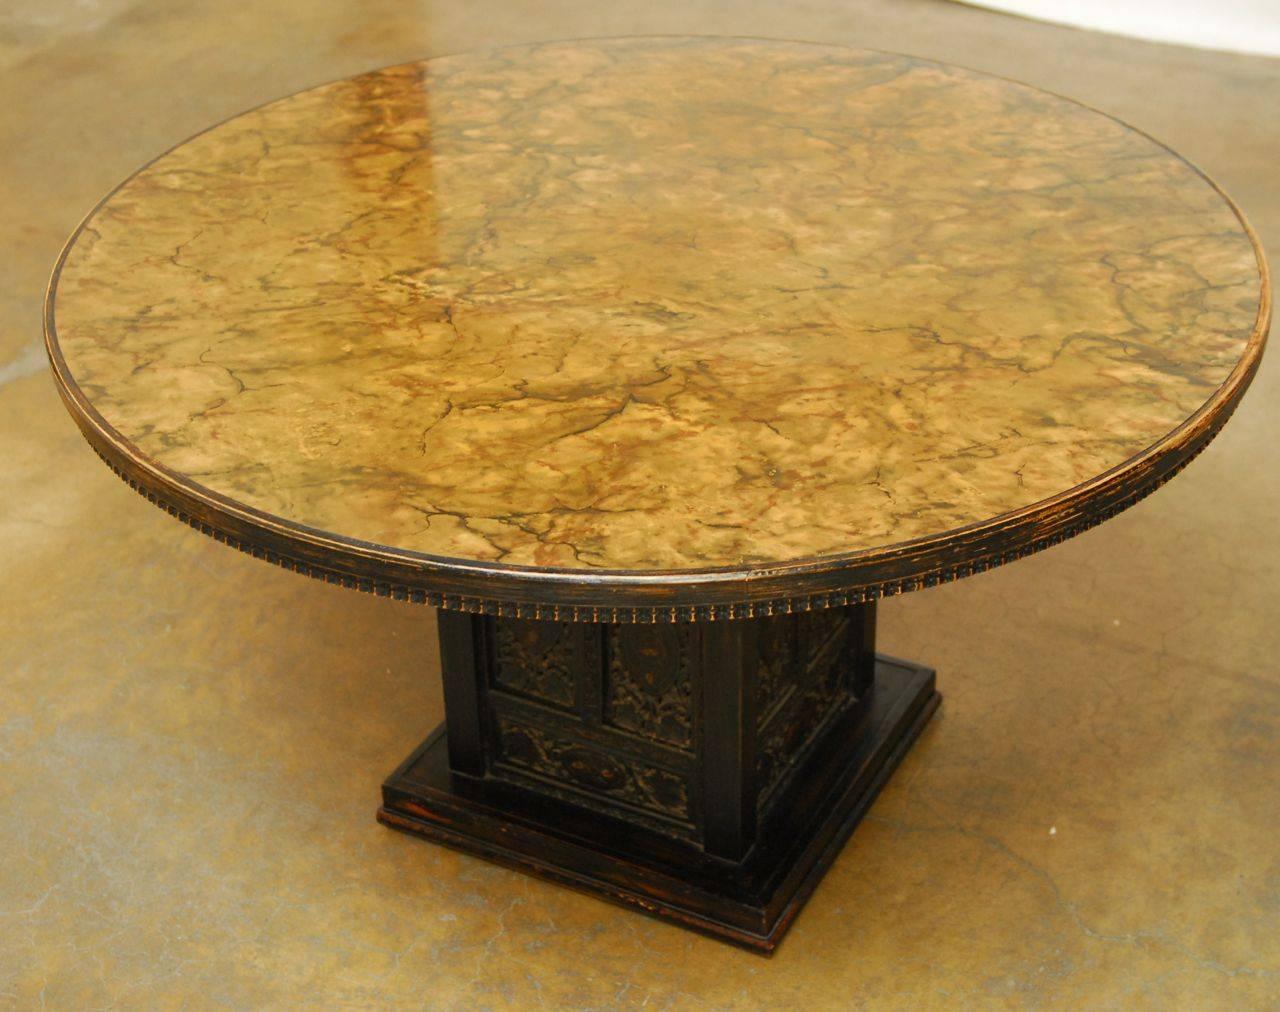 Hand-Carved Mid-Century Modern Round Pedestal Table by Ritts